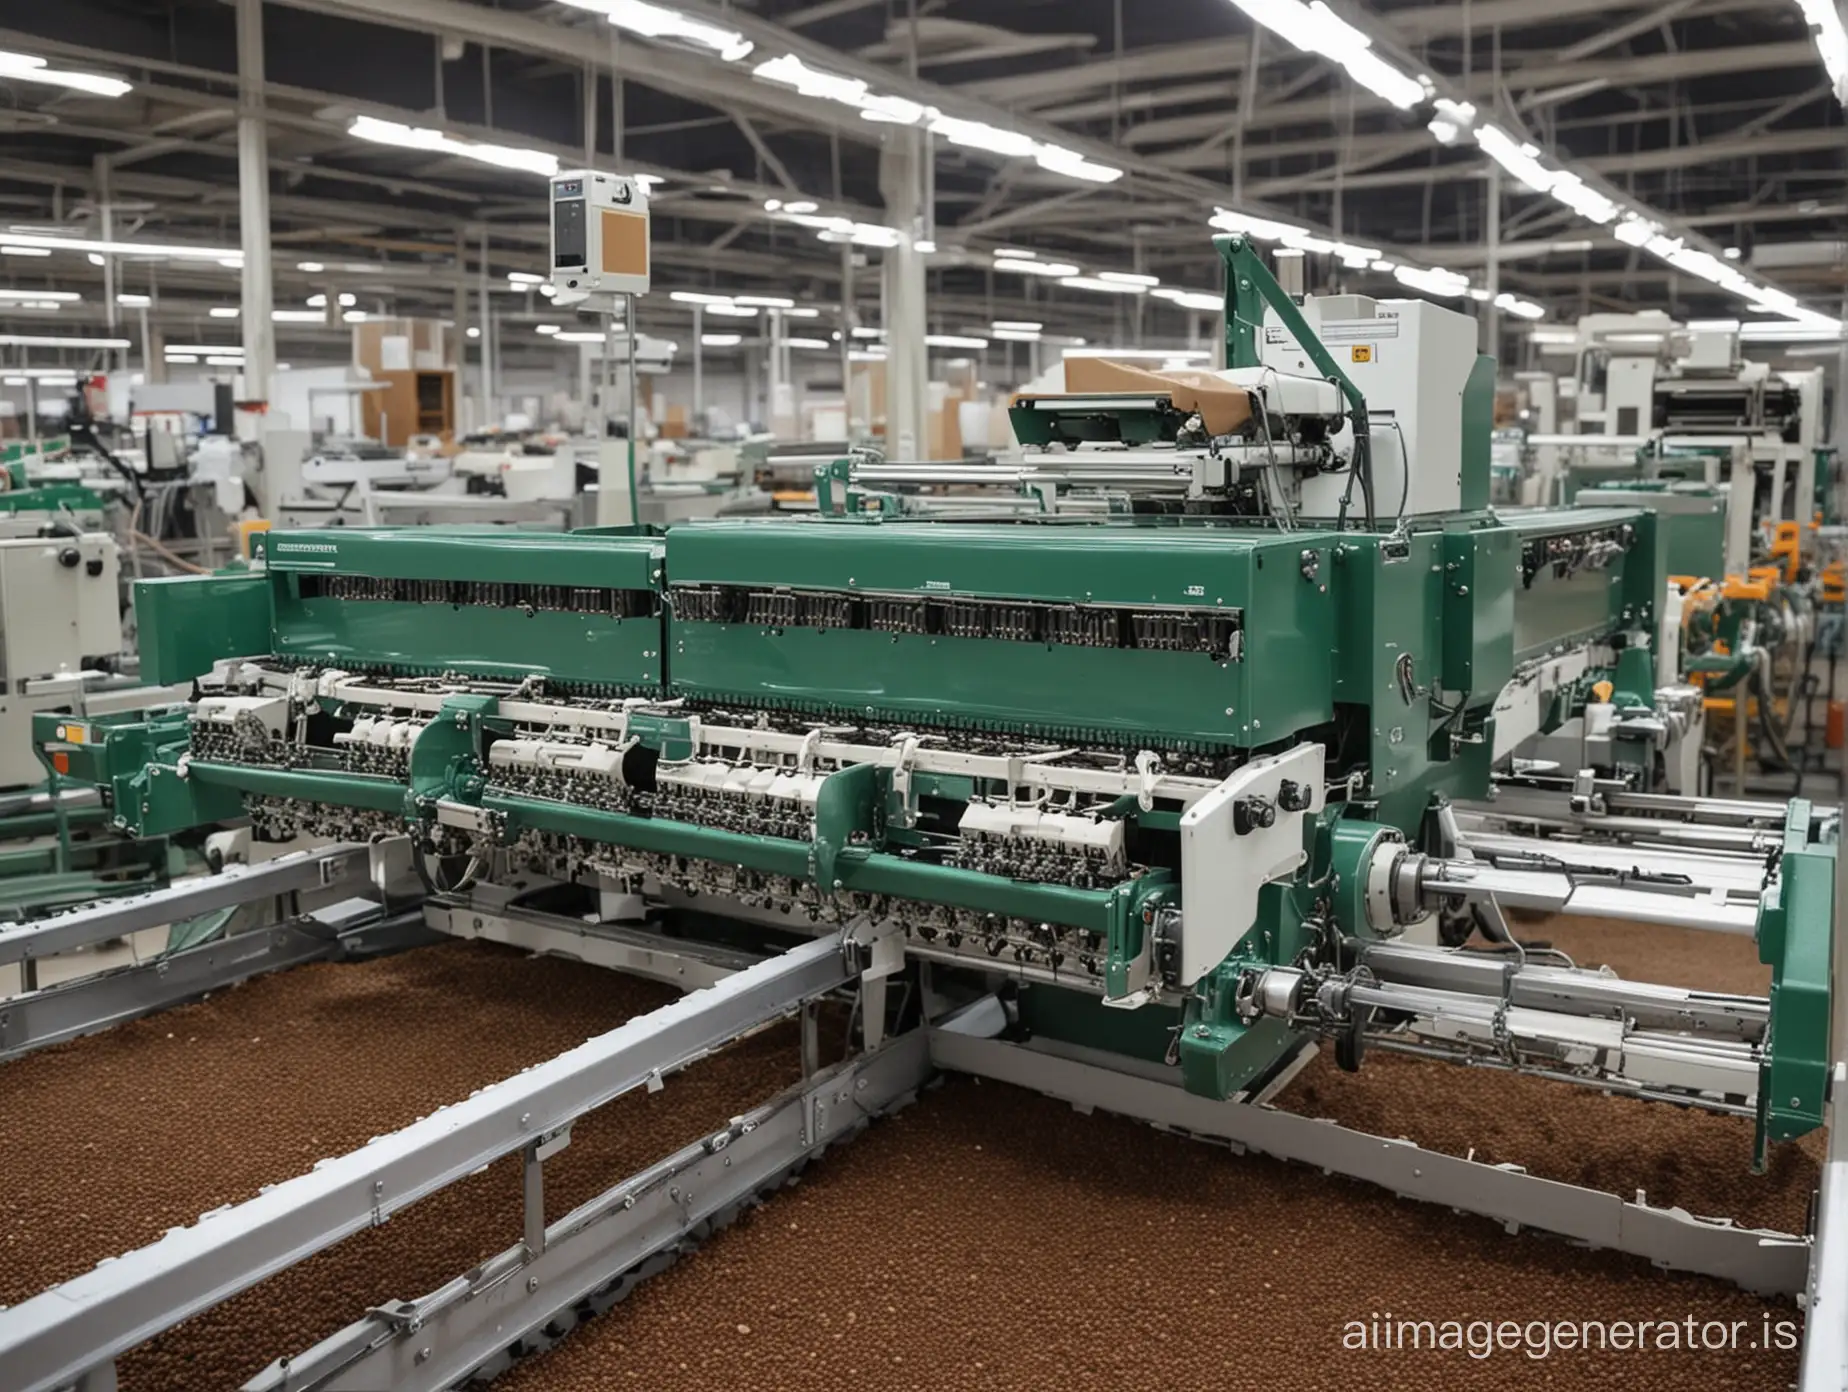 A fully automatic sowing machine is sowing seeds on the assembly line